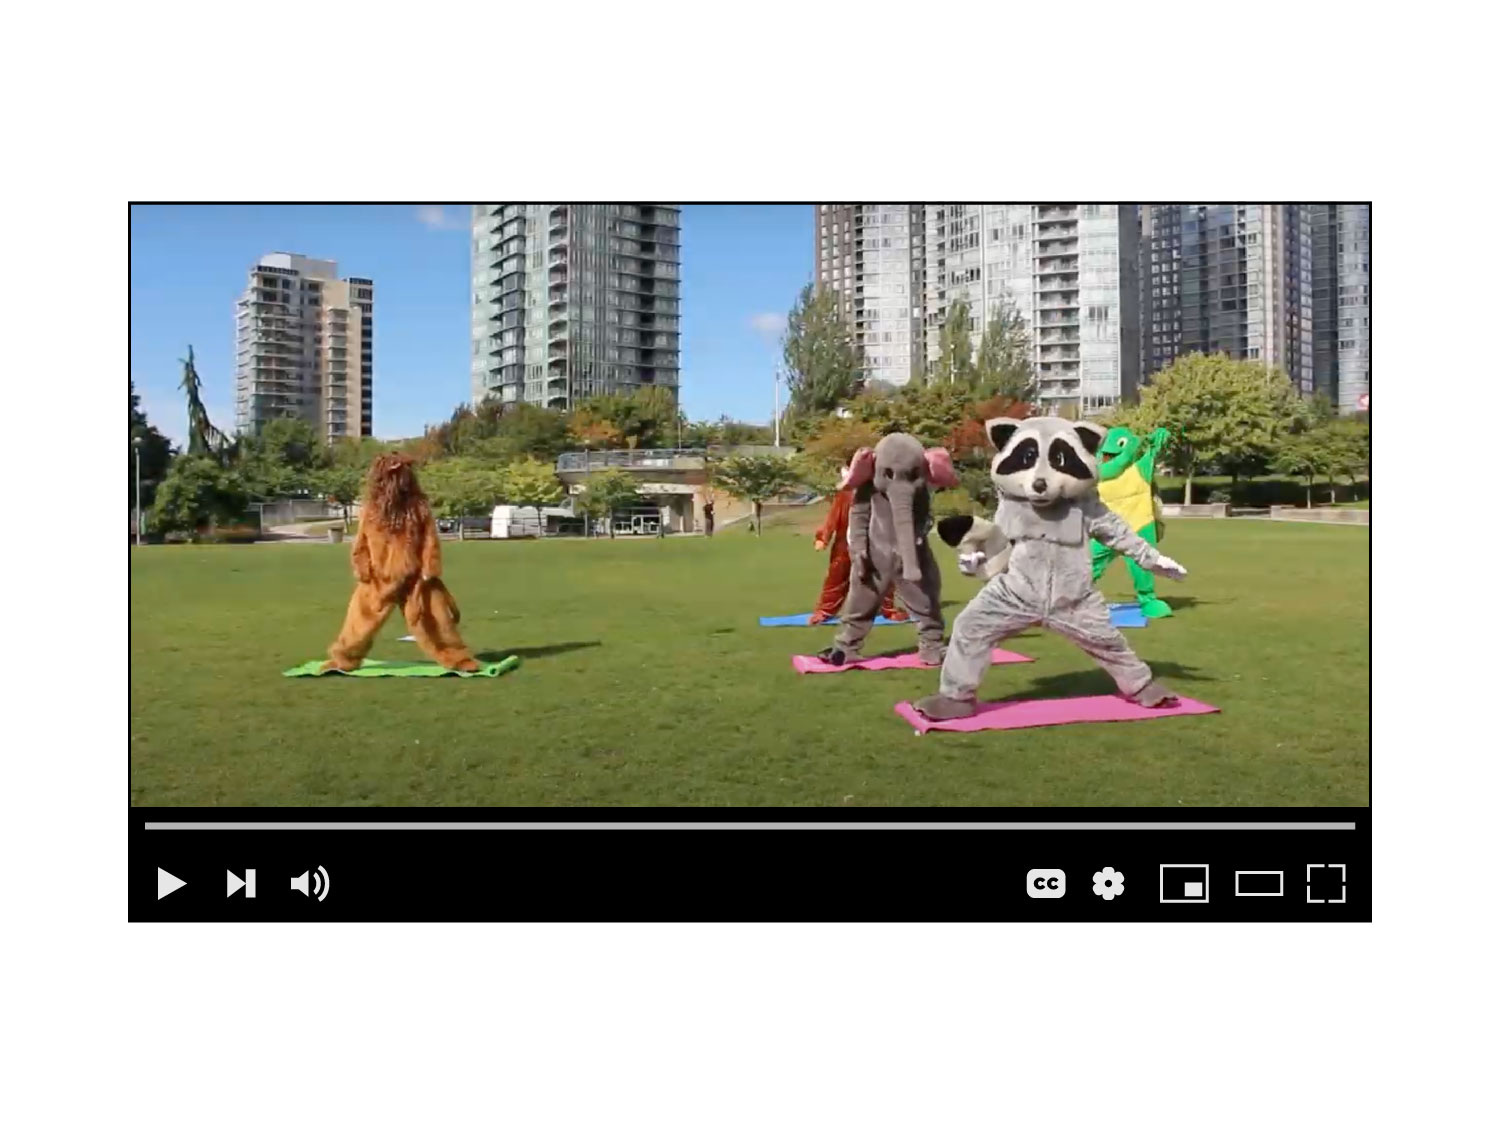 Mockup of a Big Sisters match story video with mascots doing yoga at the park.